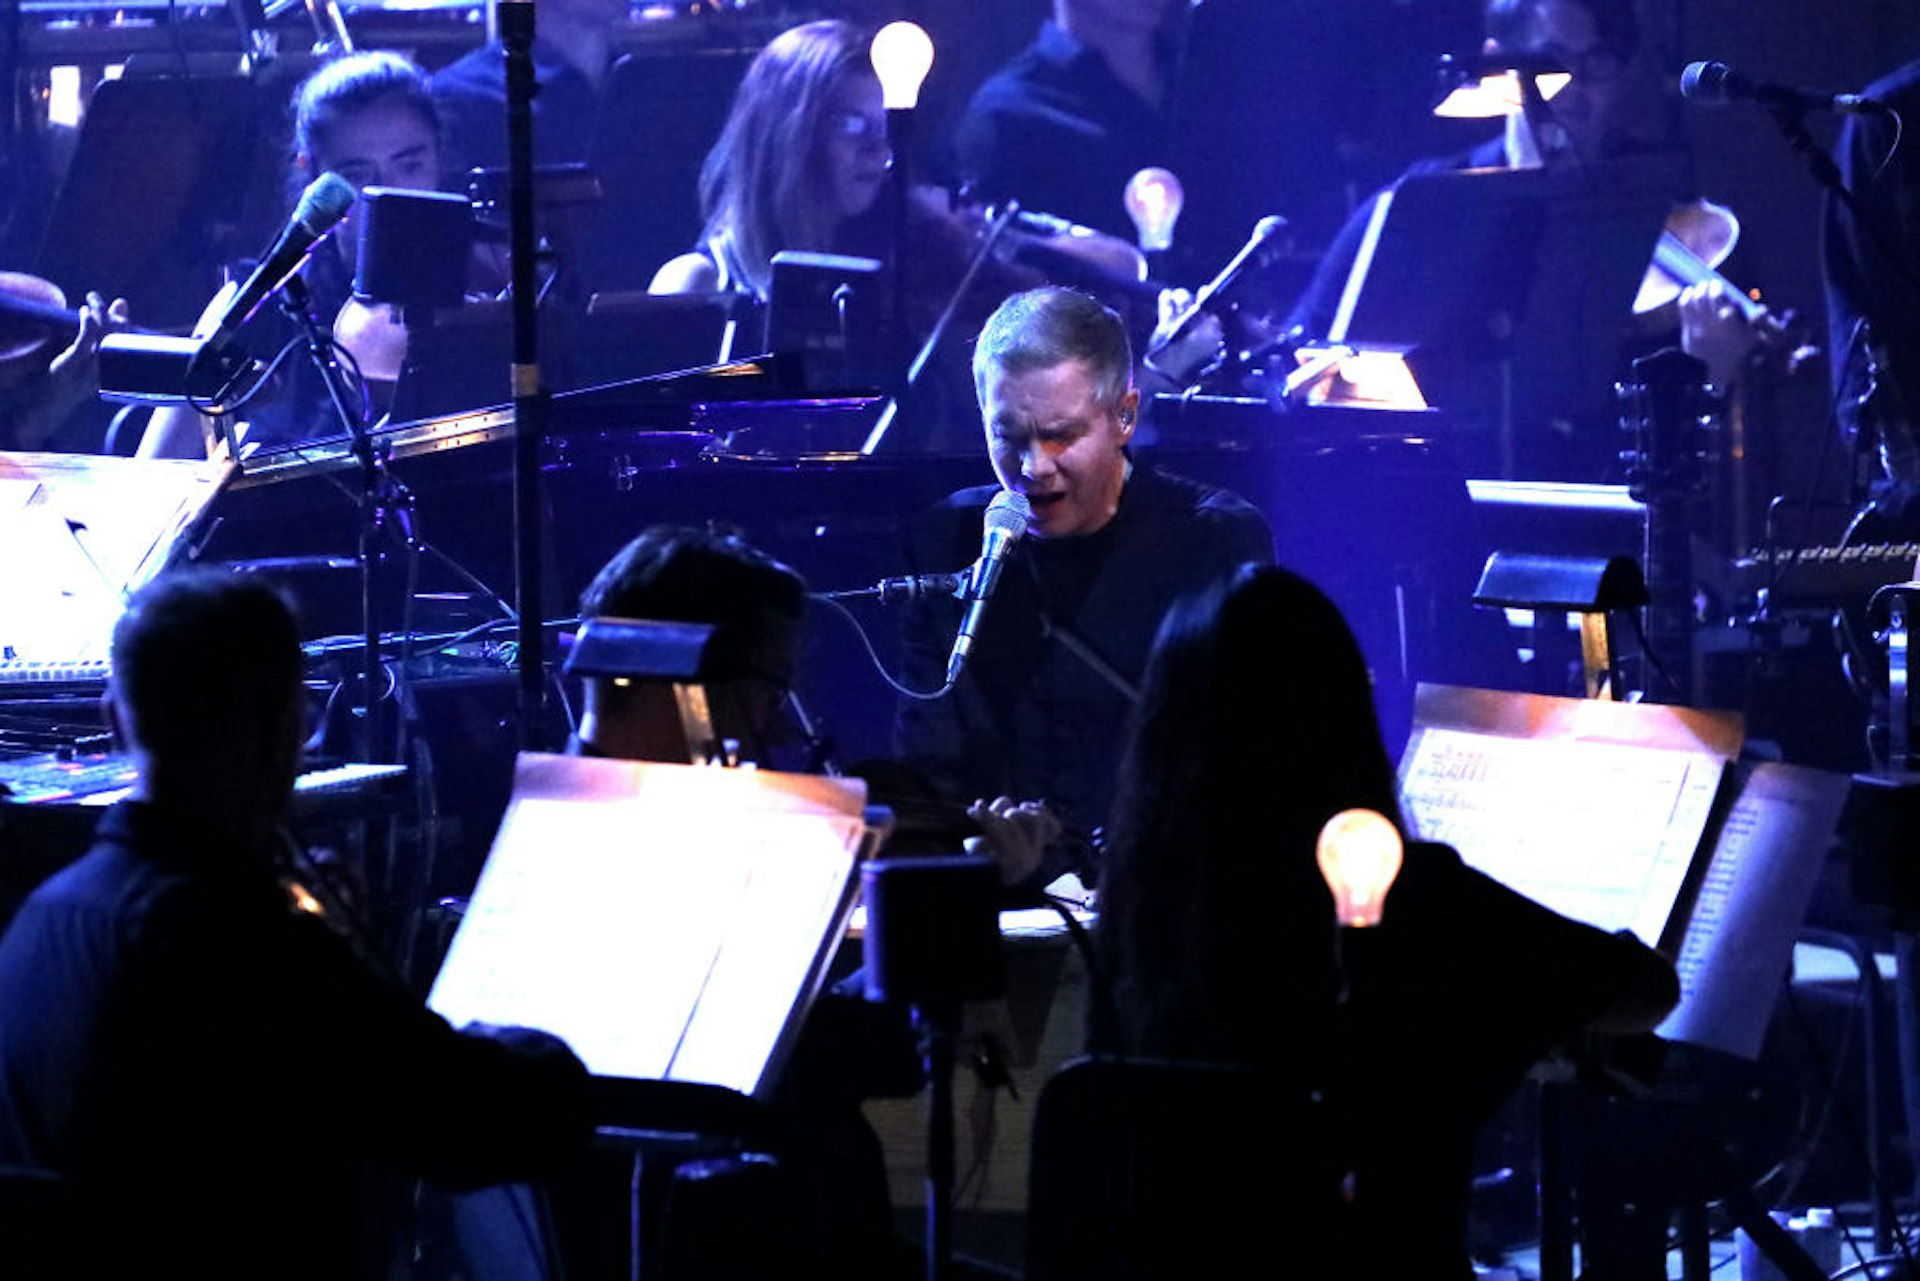 A man sings surrounded by an orchestra of fellow musicians